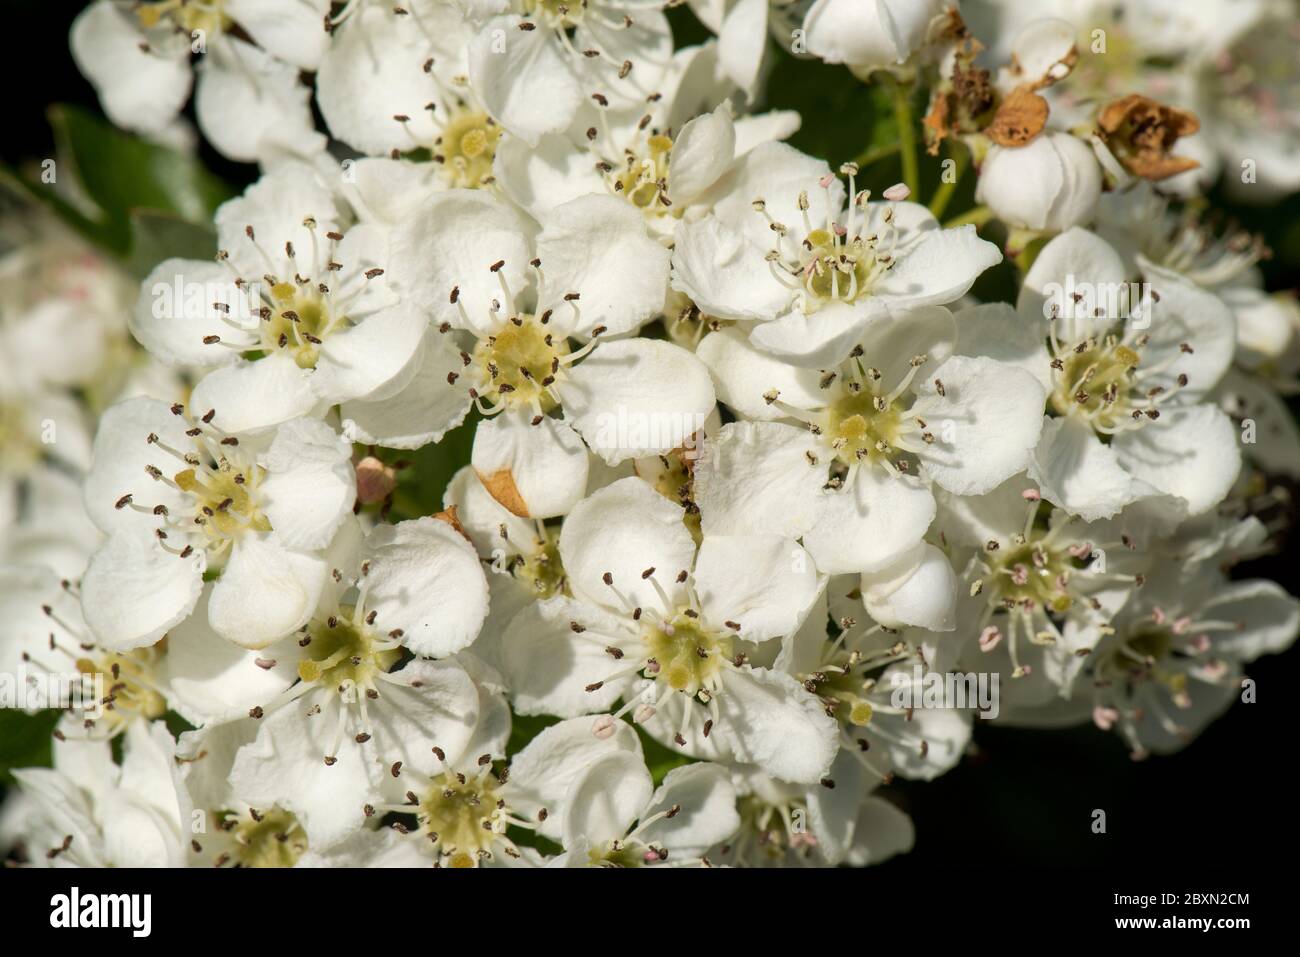 May or hawthorn blossom (Crataegus monogyna) white flowers on a small fragrant tree typical of spring, Berkshire, May Stock Photo